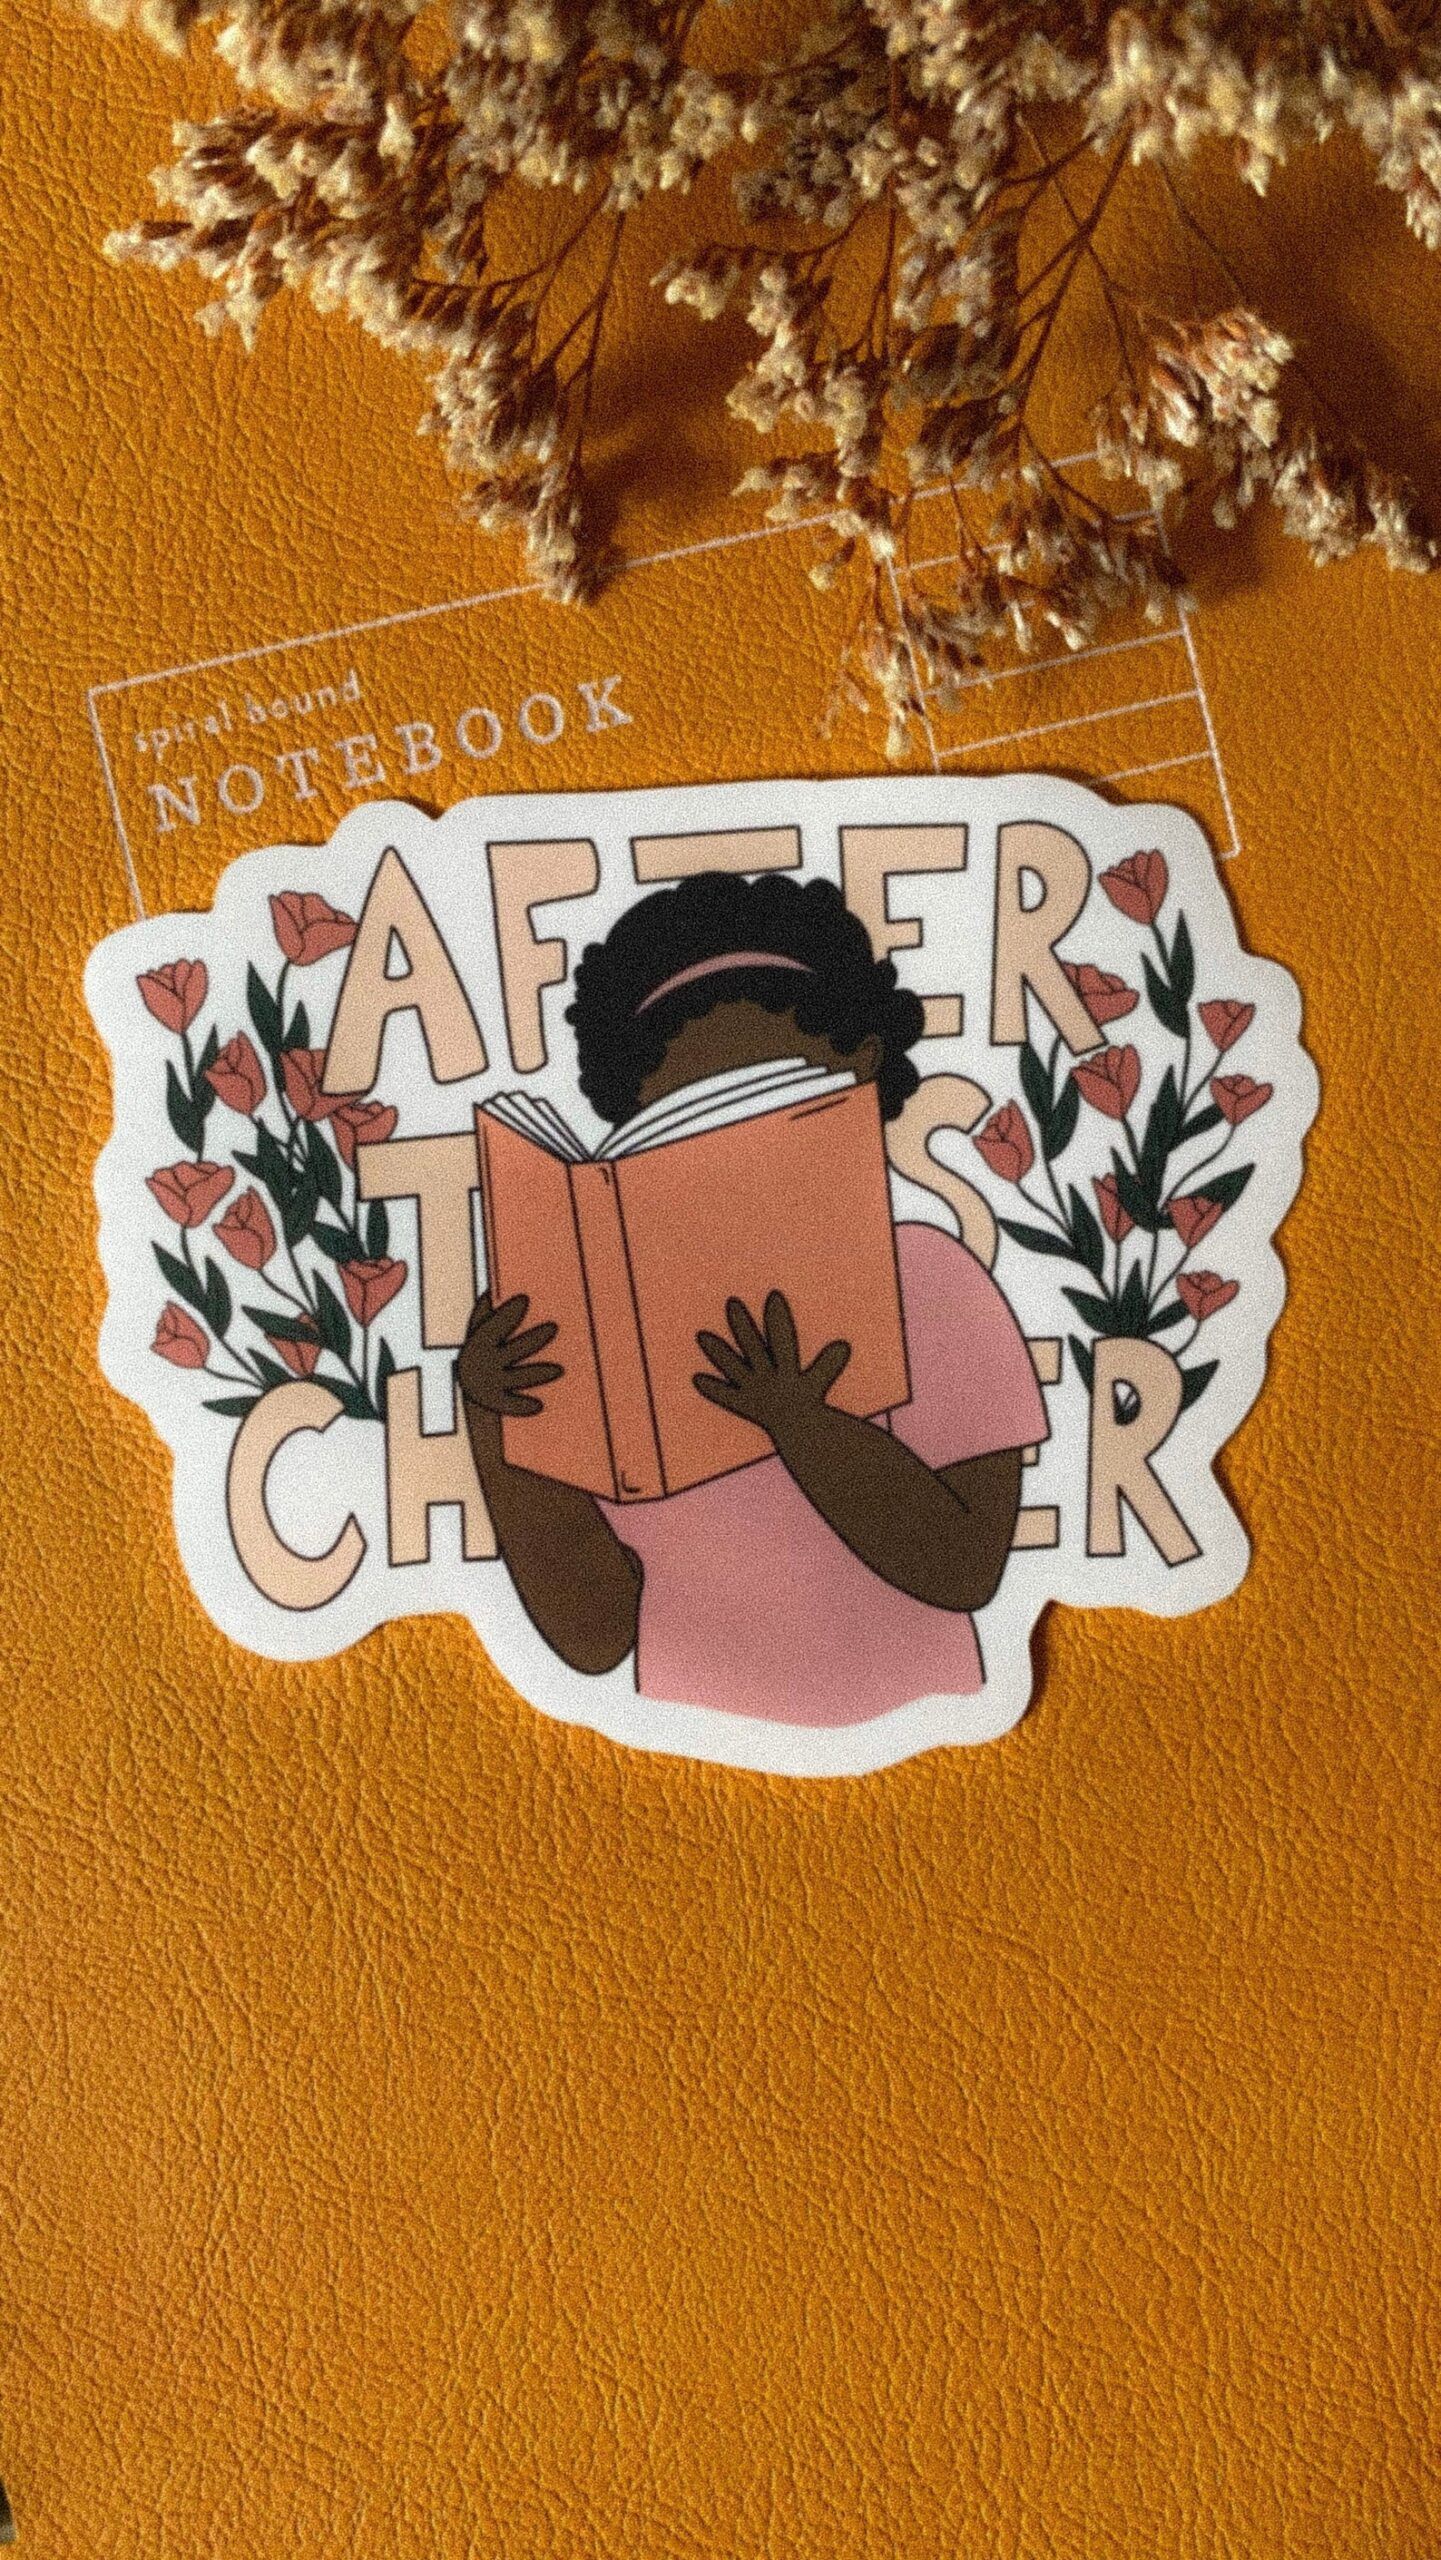 Image of a sticker featuring a Black reader with an open book. Behind the reader are the words 